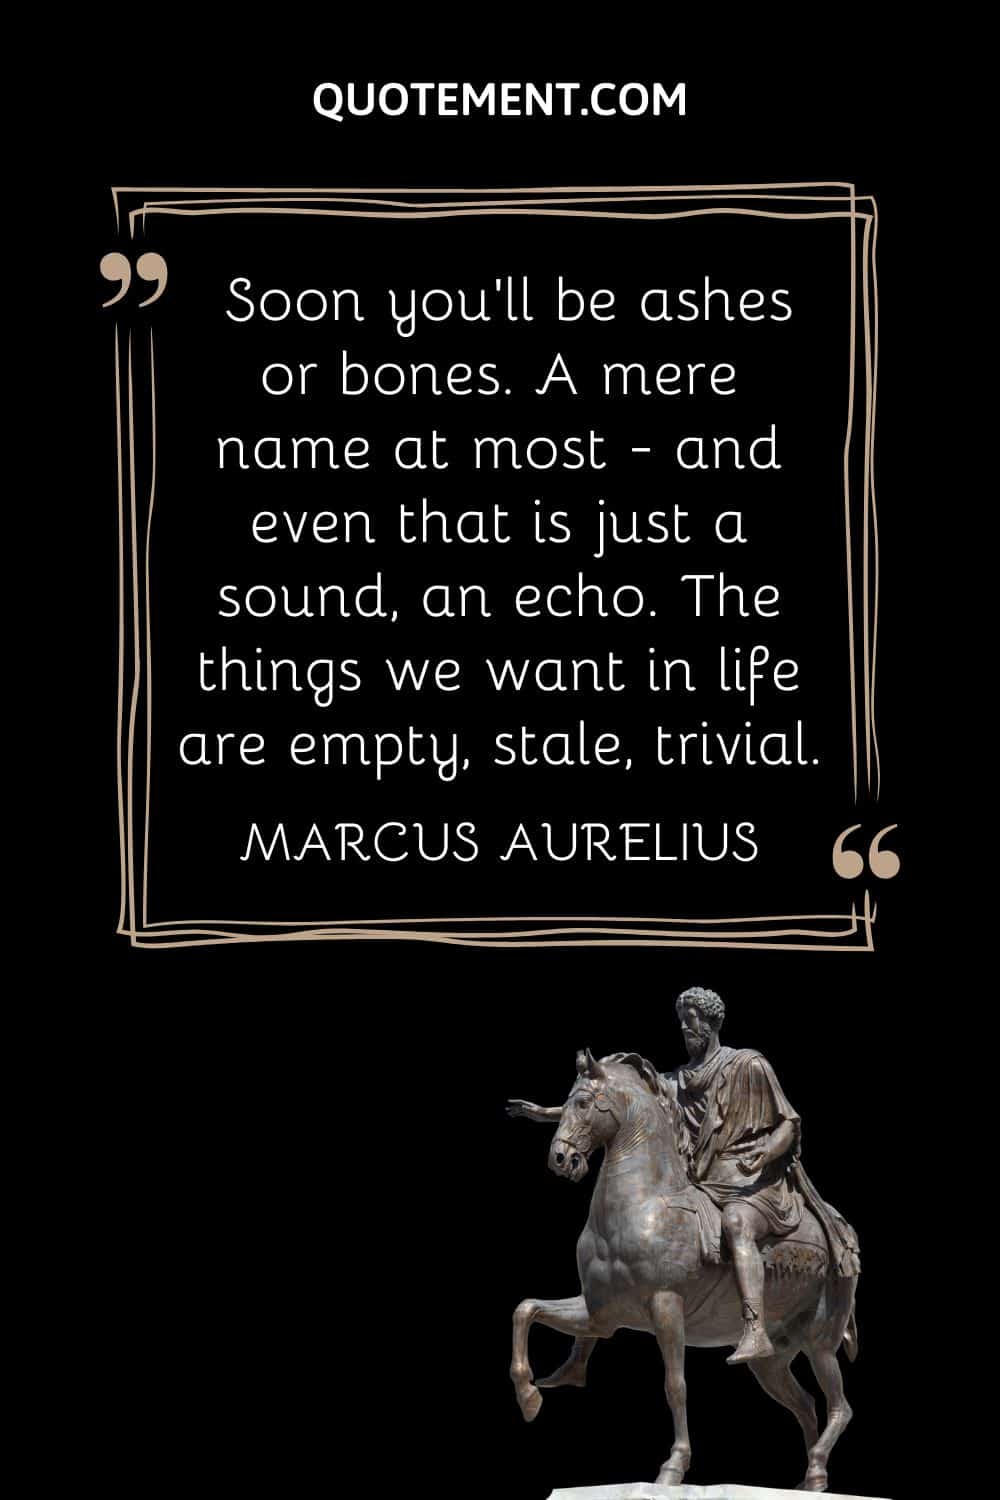 “Soon you'll be ashes or bones. A mere name at most - and even that is just a sound, an echo. The things we want in life are empty, stale, trivial.” — Marcus Aurelius